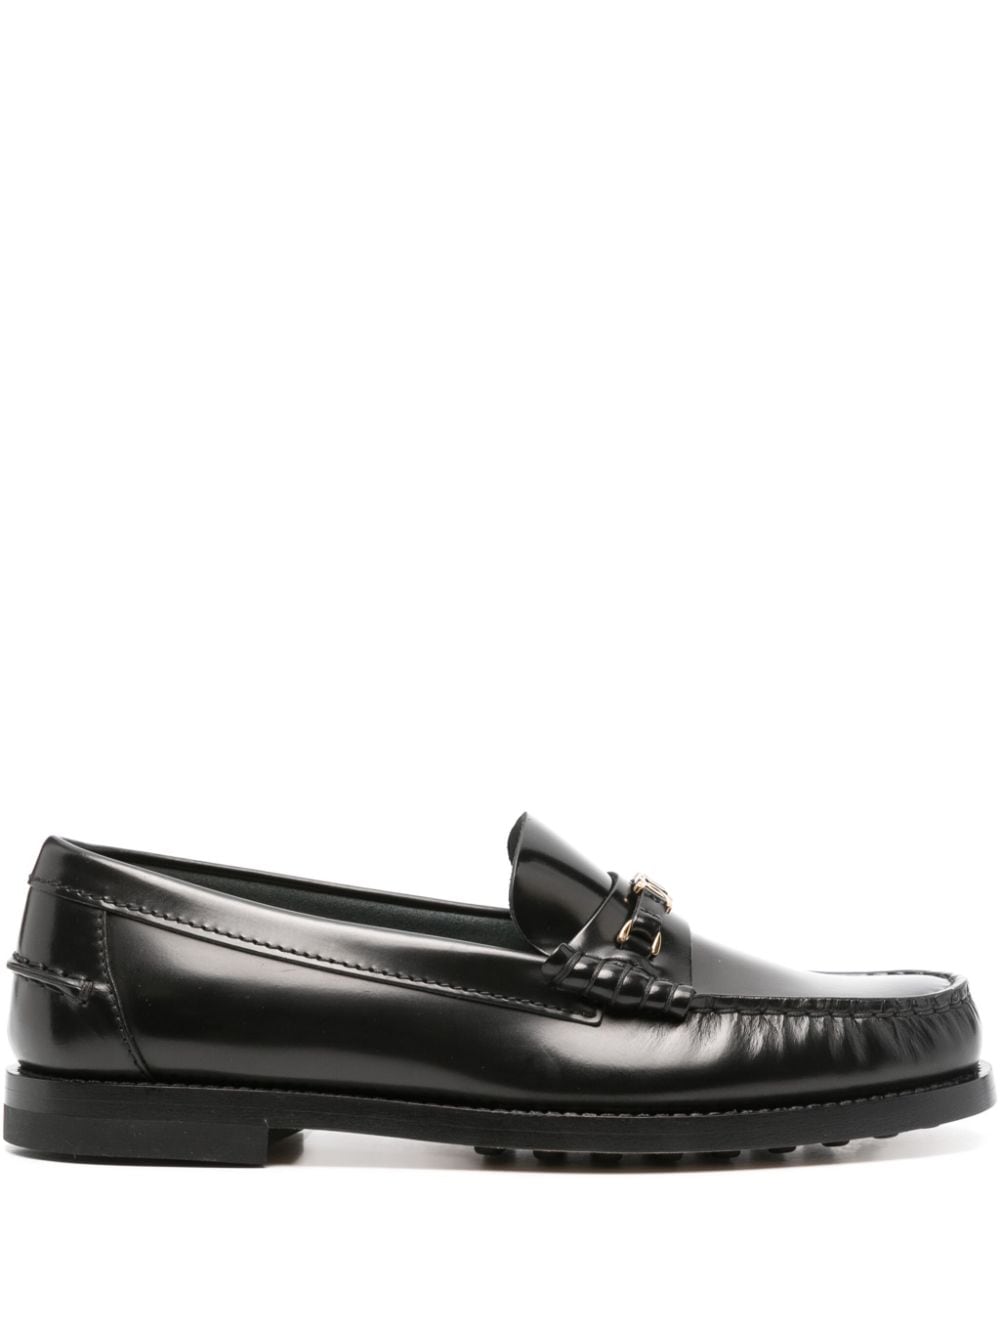 TOD'S CHAIN LEATHER LOAFERS